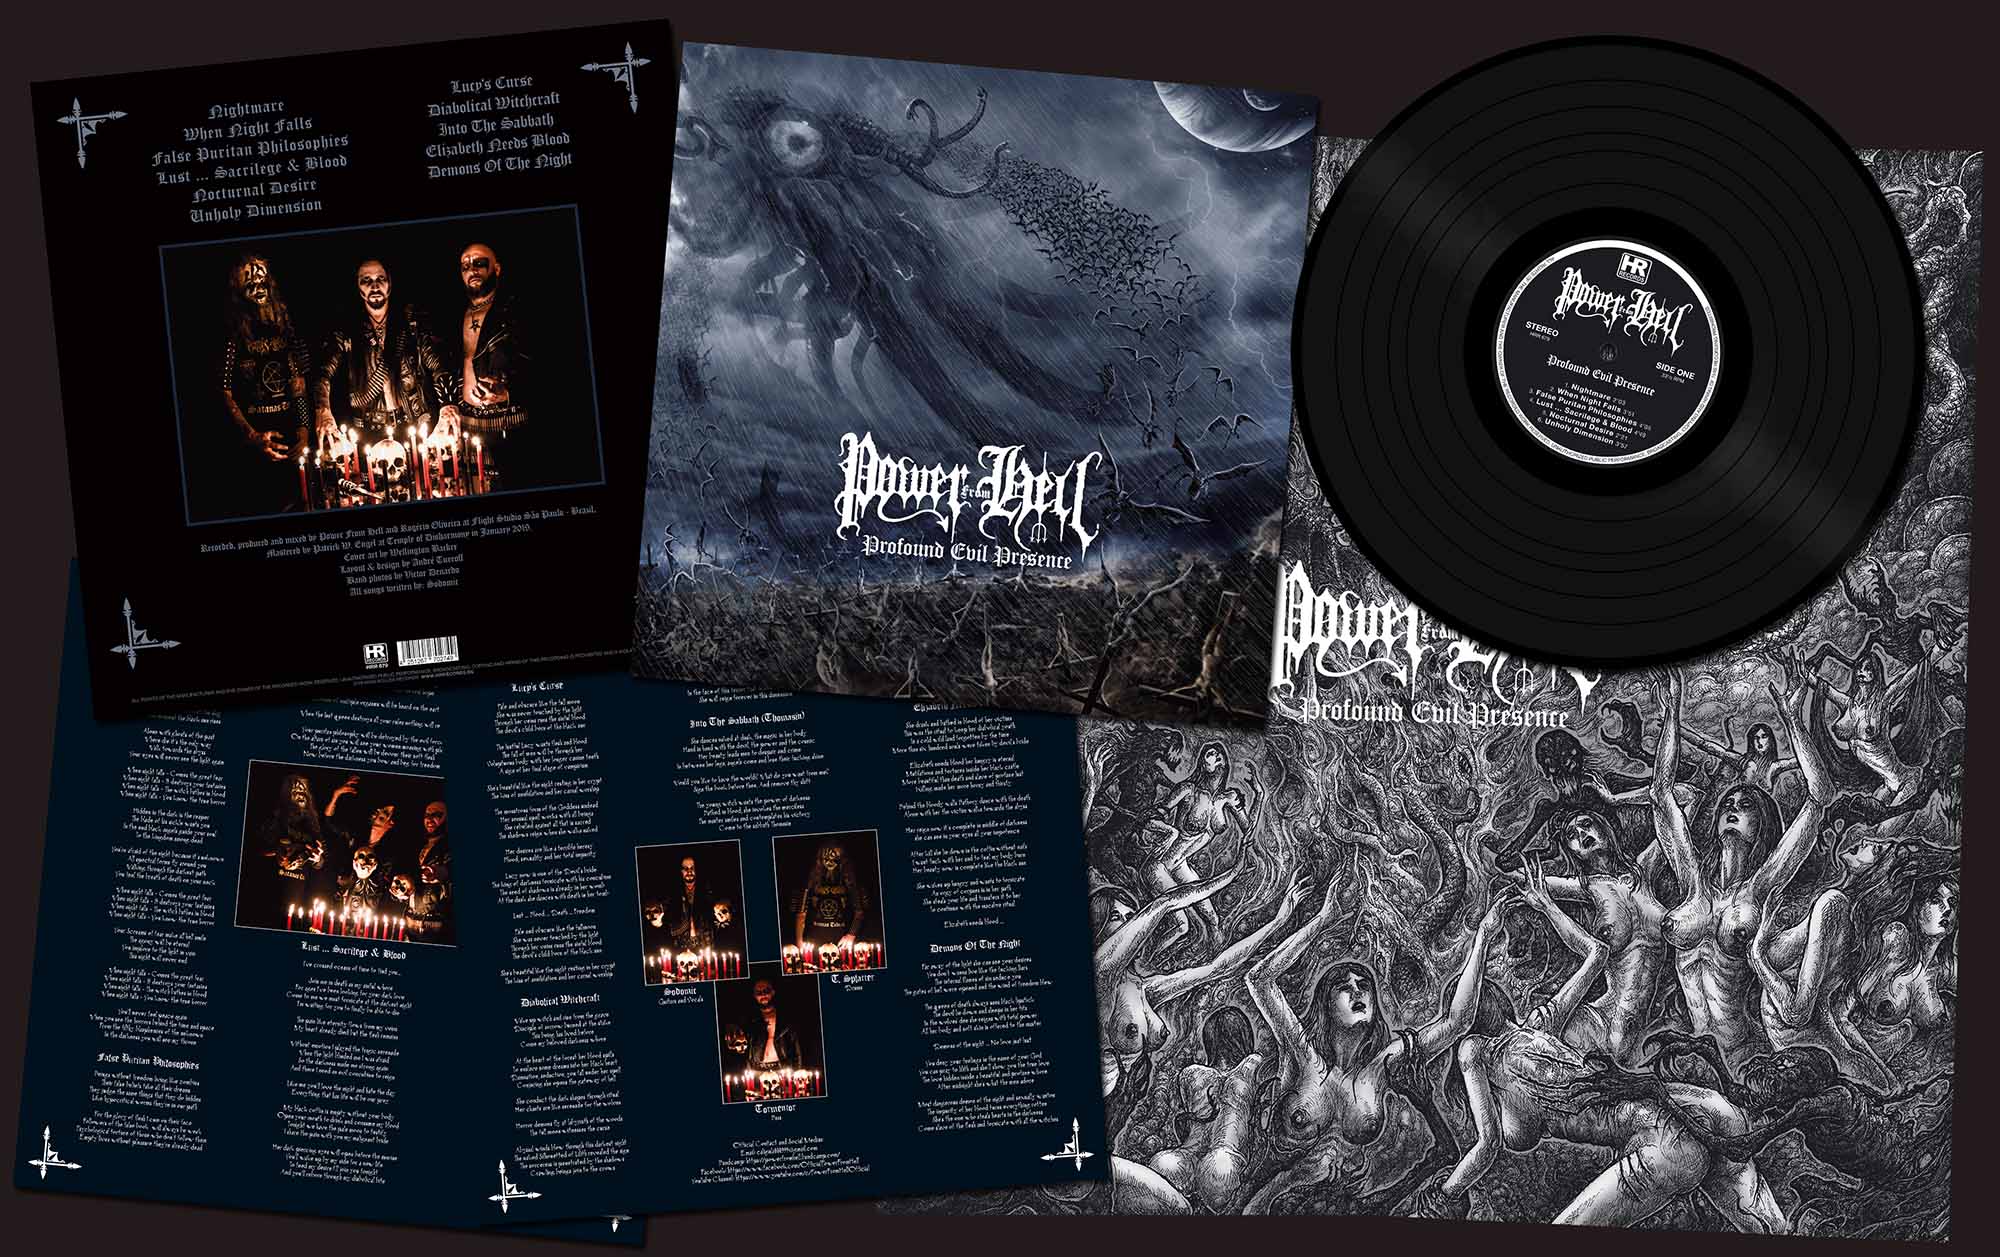 POWER FROM HELL - Profound Evil Presence  LP